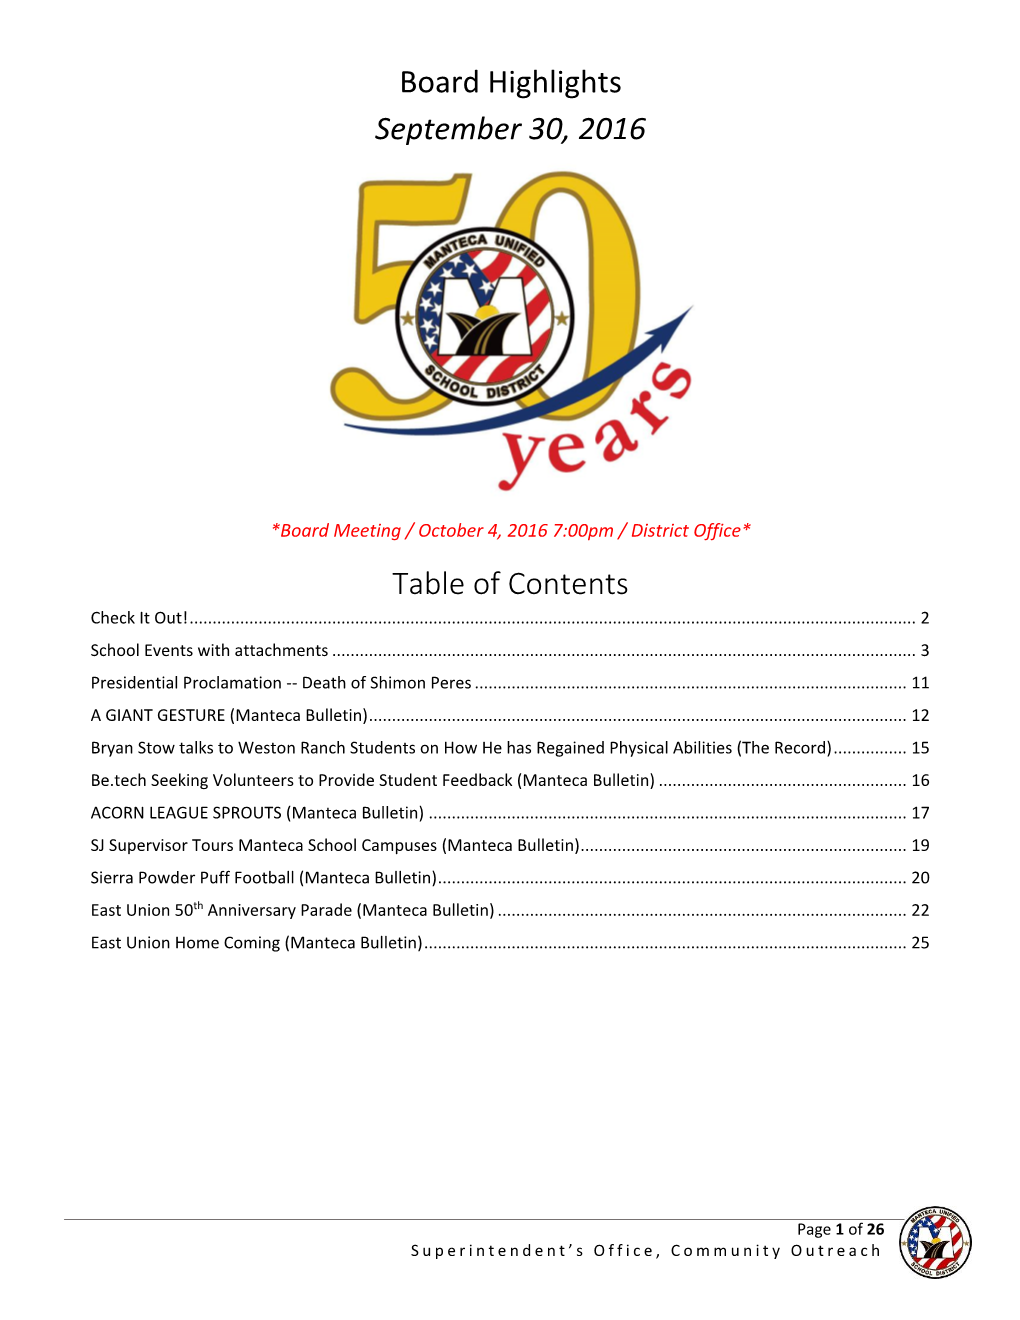 Board Highlights September 30, 2016 Table of Contents